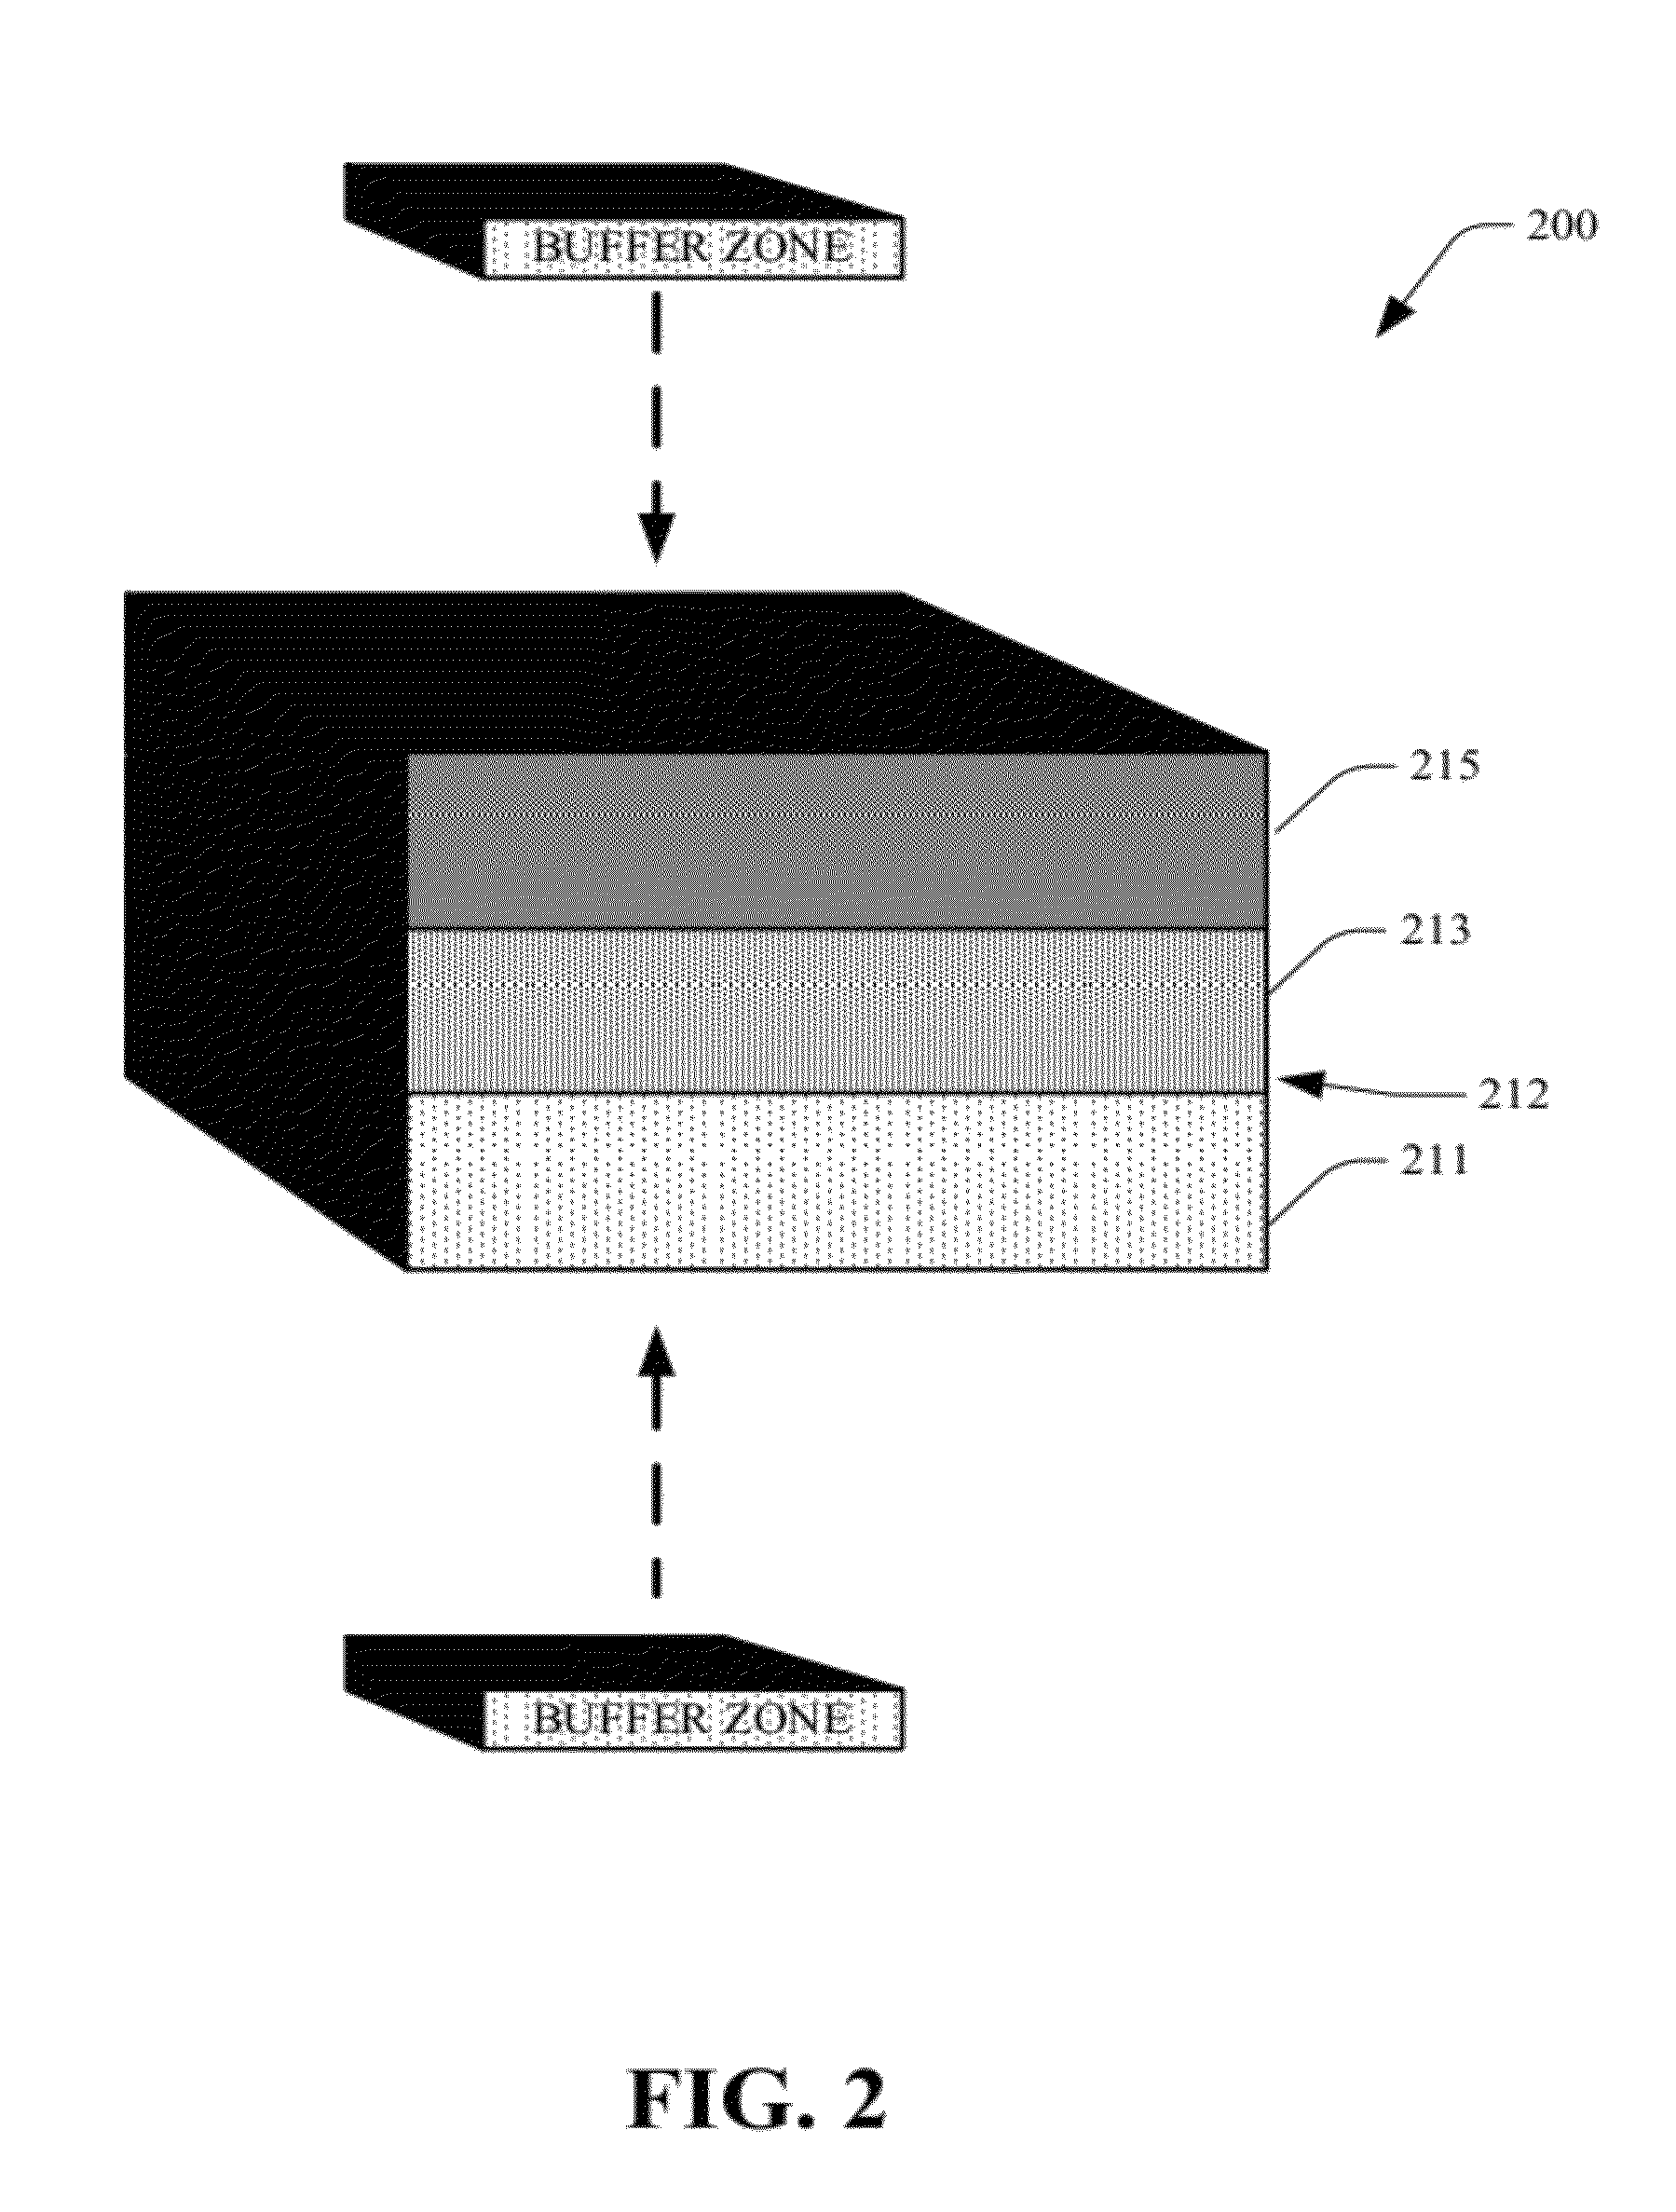 Photovoltaic cell with buffer zone